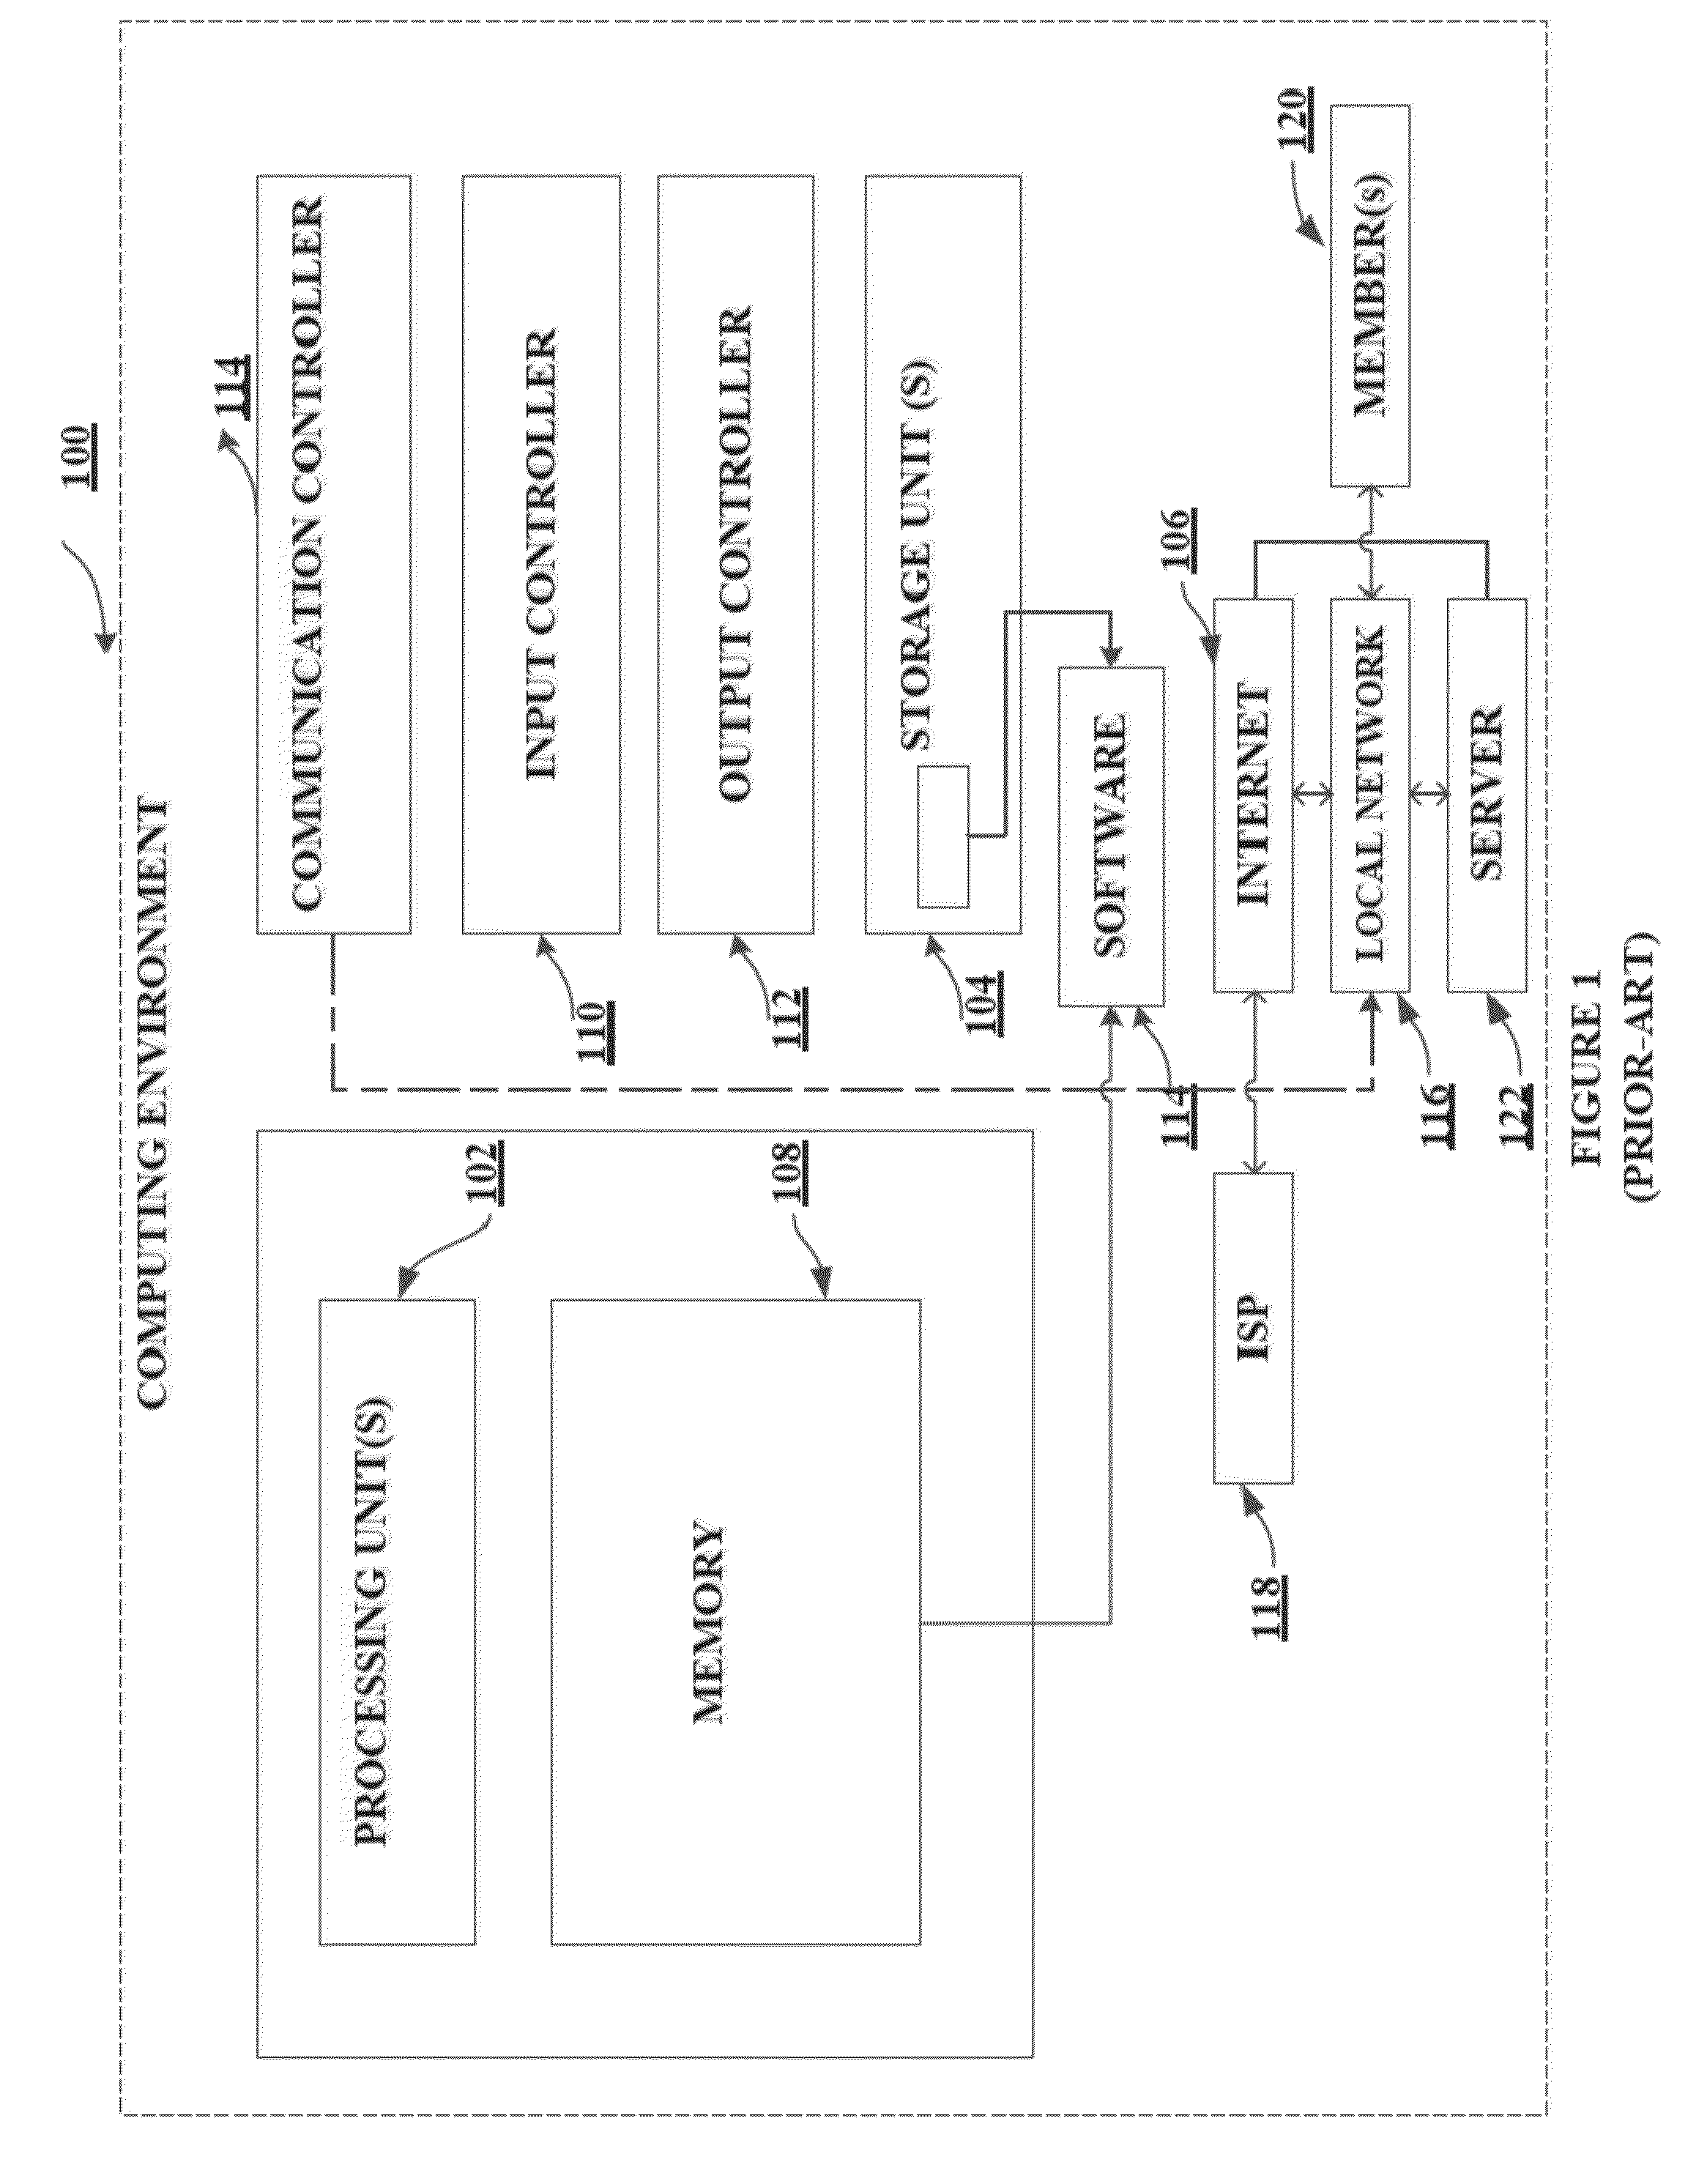 System for making personalized offers for business facilitation of an entity and methods thereof